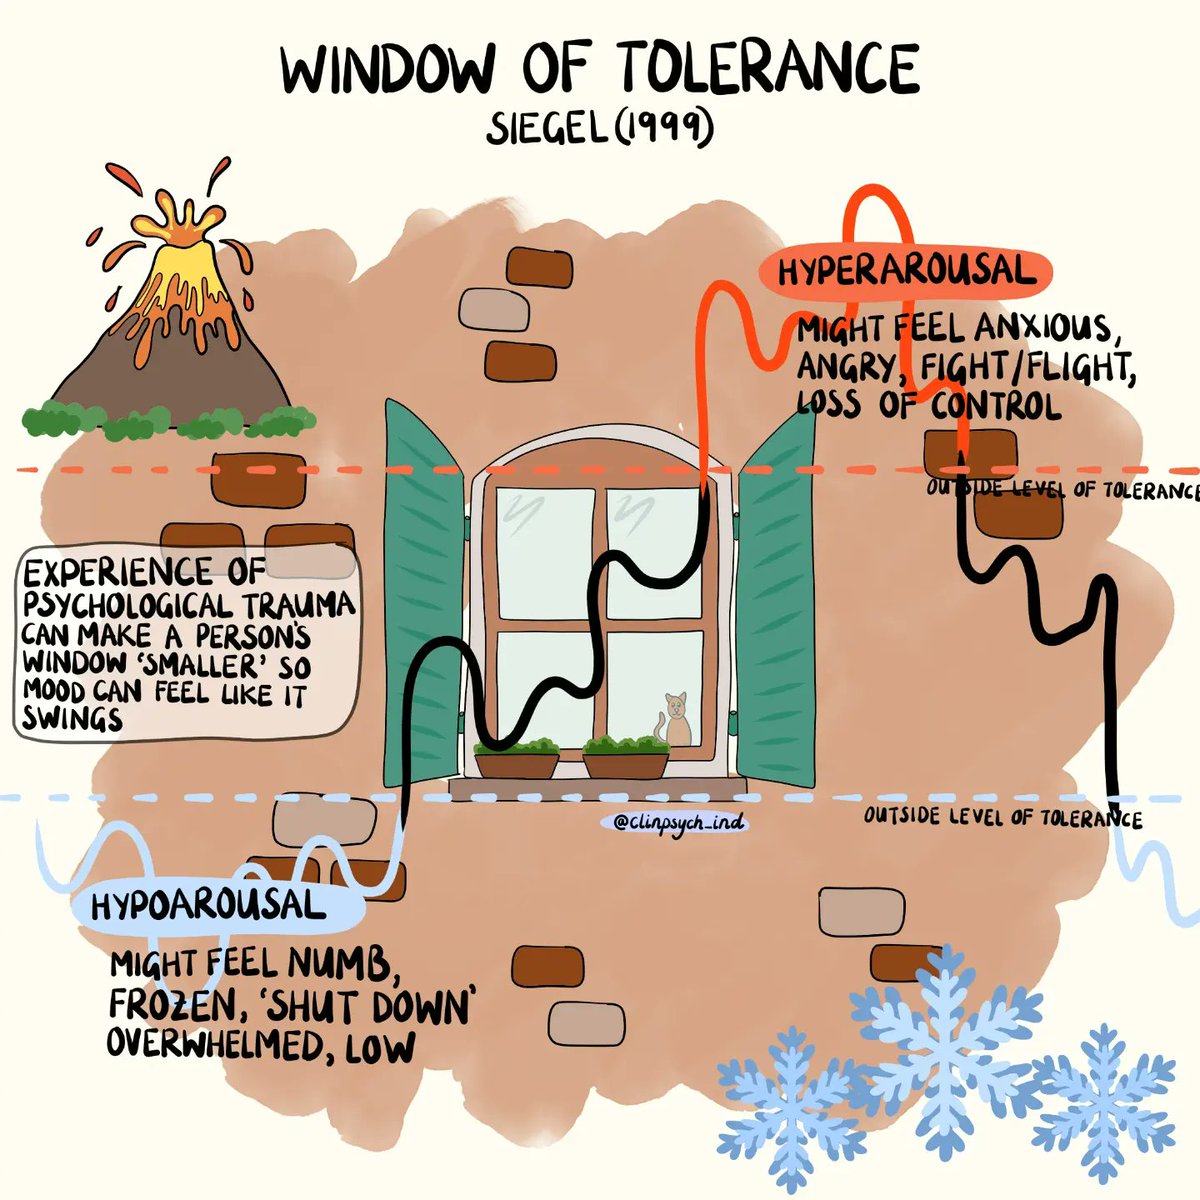 I drew out some window of tolerance graphics as I've been using this so much on my placement. it's been such a helpful part of psychoeducation that can be used collaboratively and compassionately